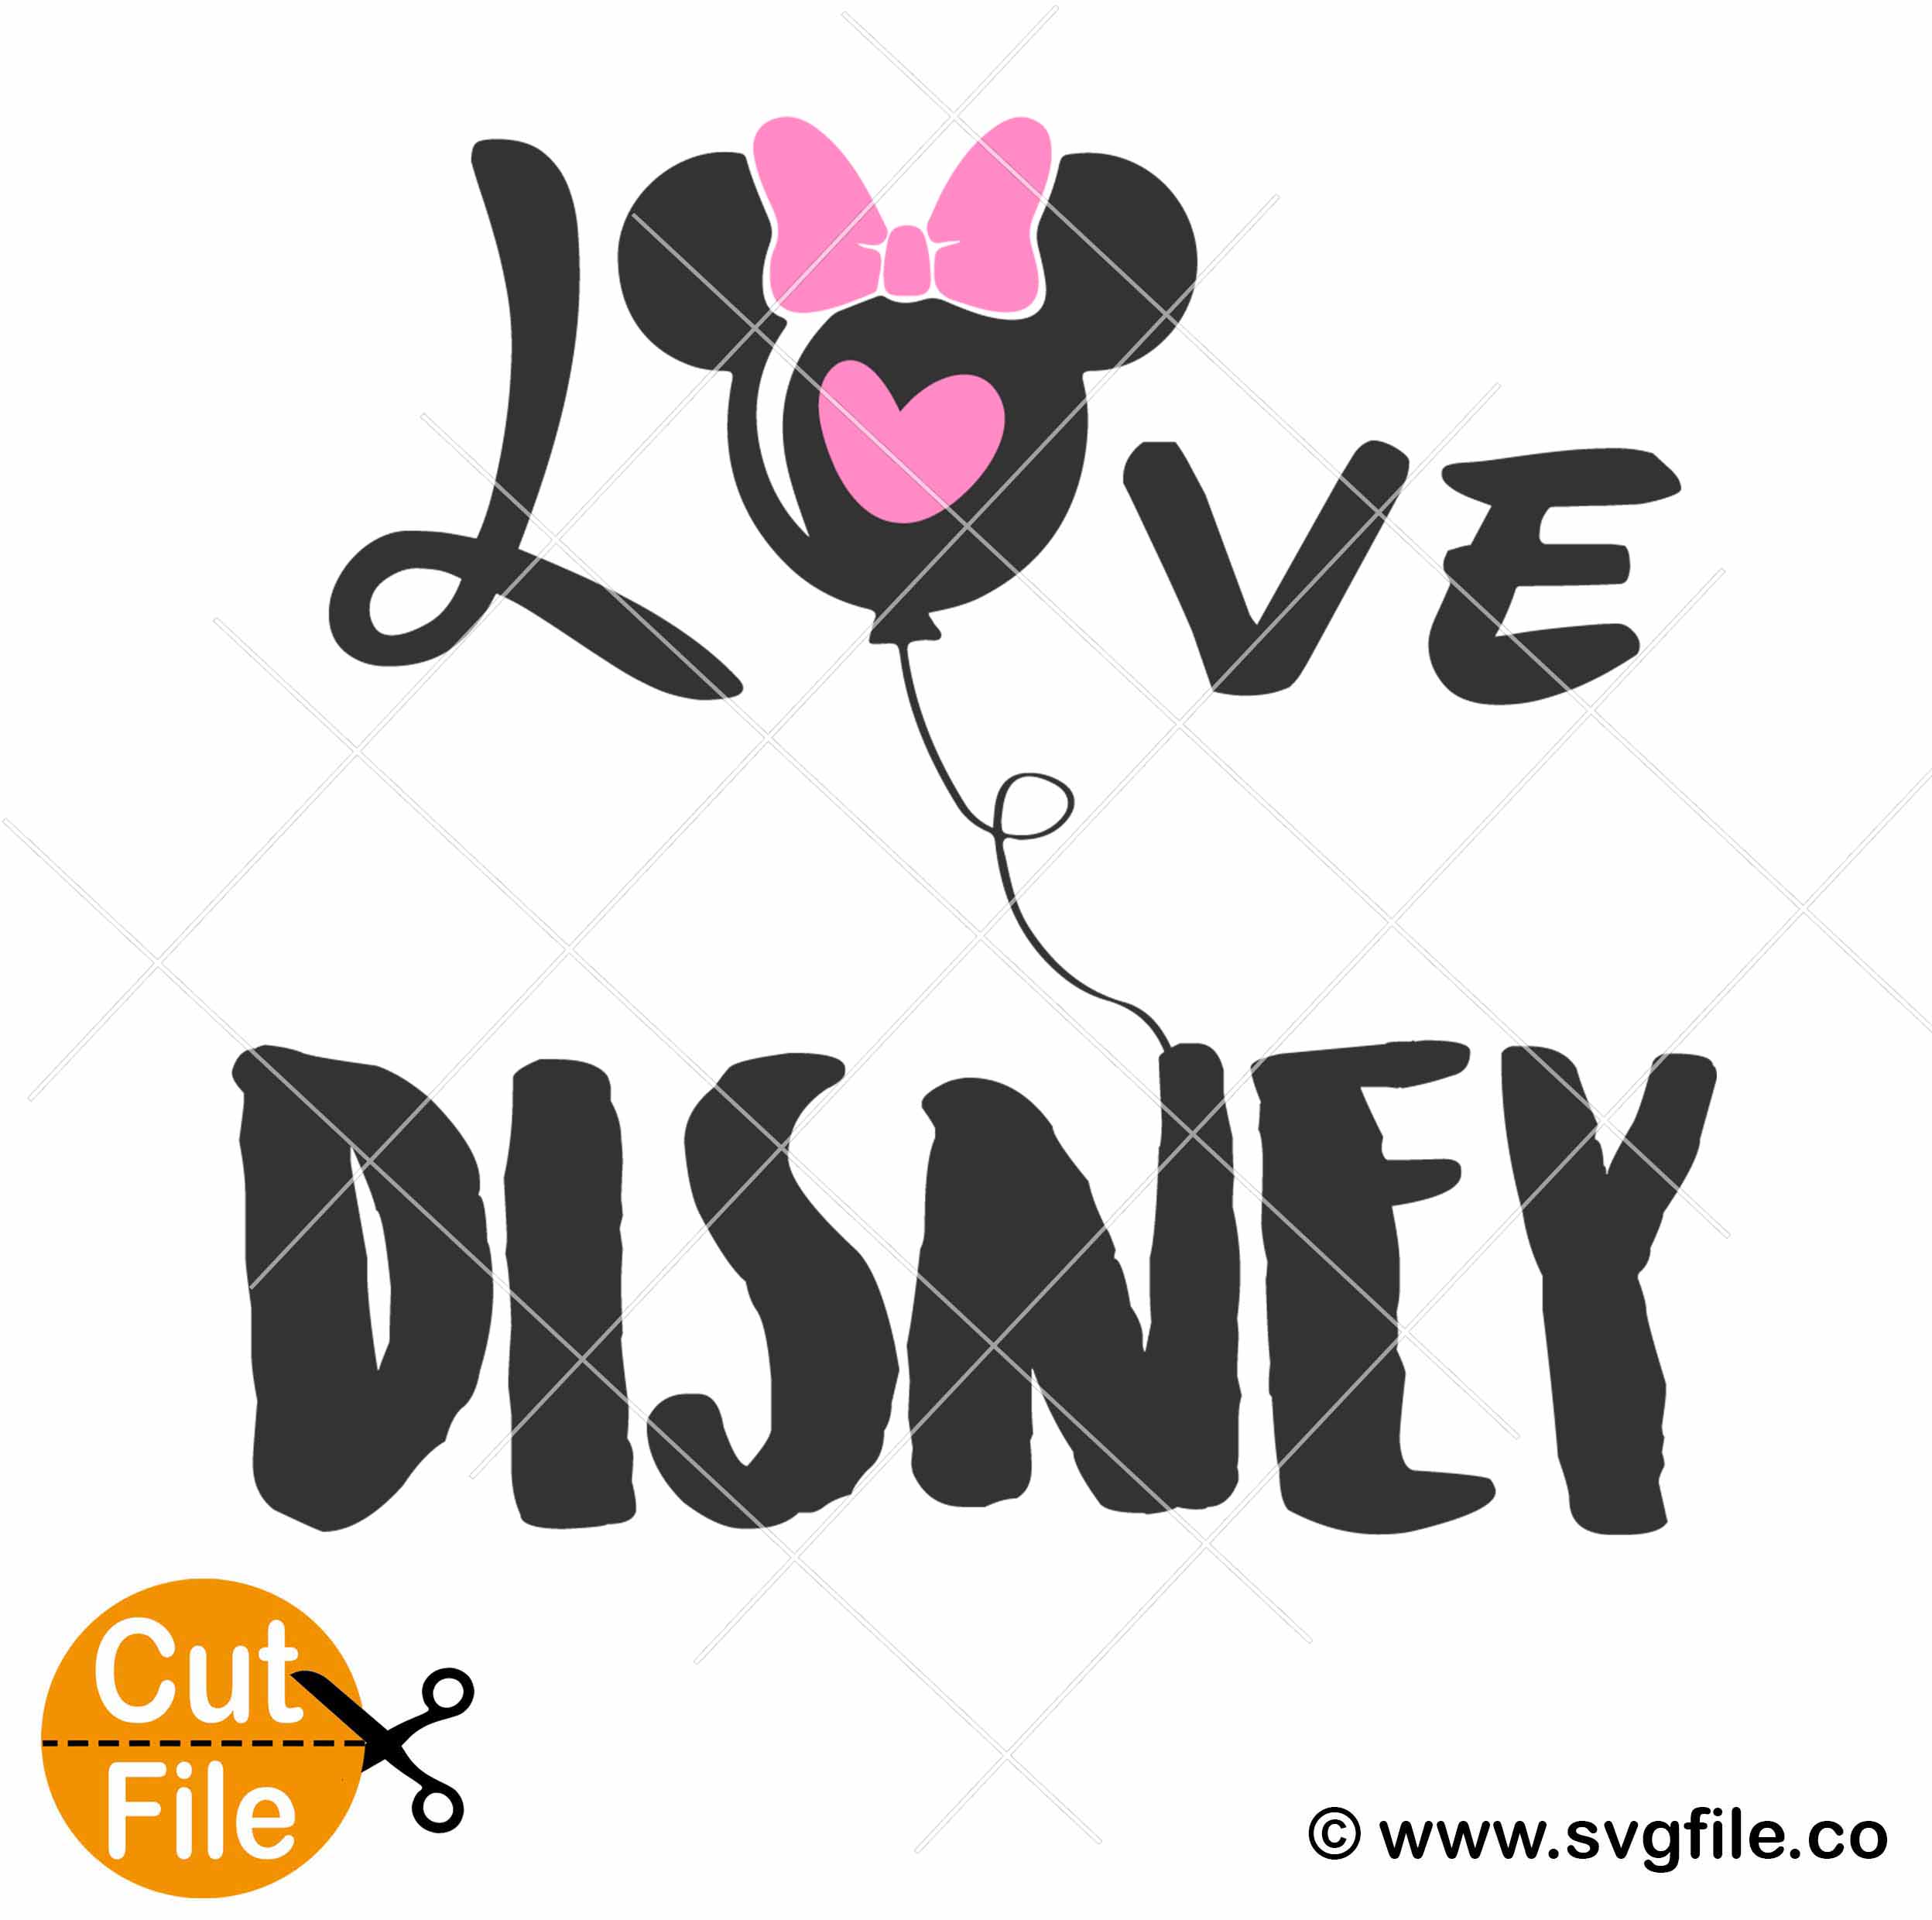 Download Love Balloon Disney Svg Svgfile Co 0 99 Cent Svg Files Life Time Access